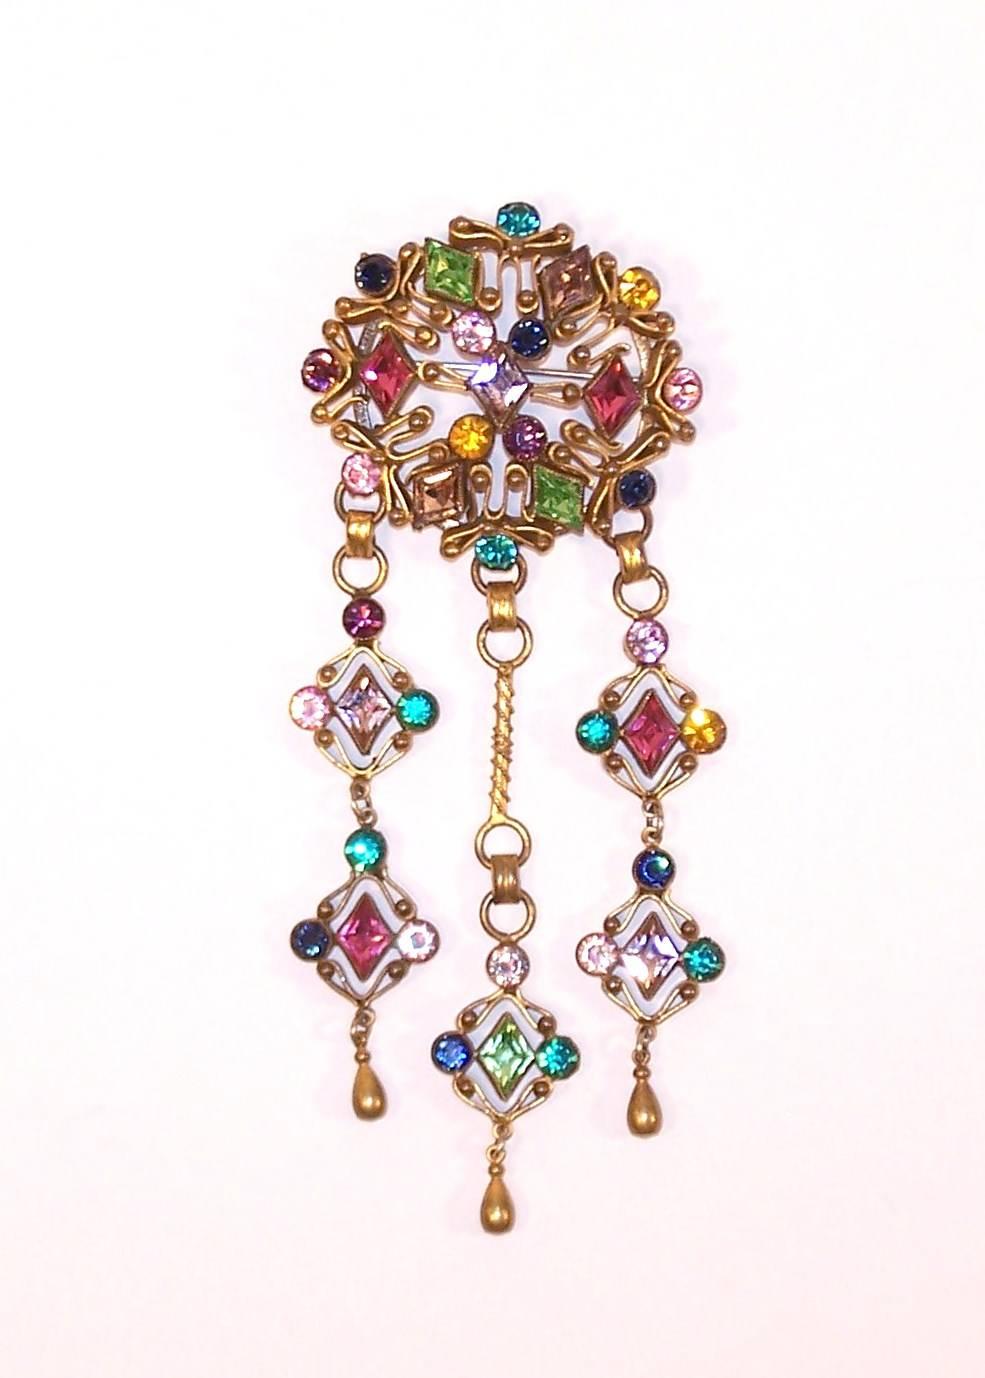 Art Deco Large C.1940 Ornate Crystal Rhinestone Brooch With Articulated Dangles